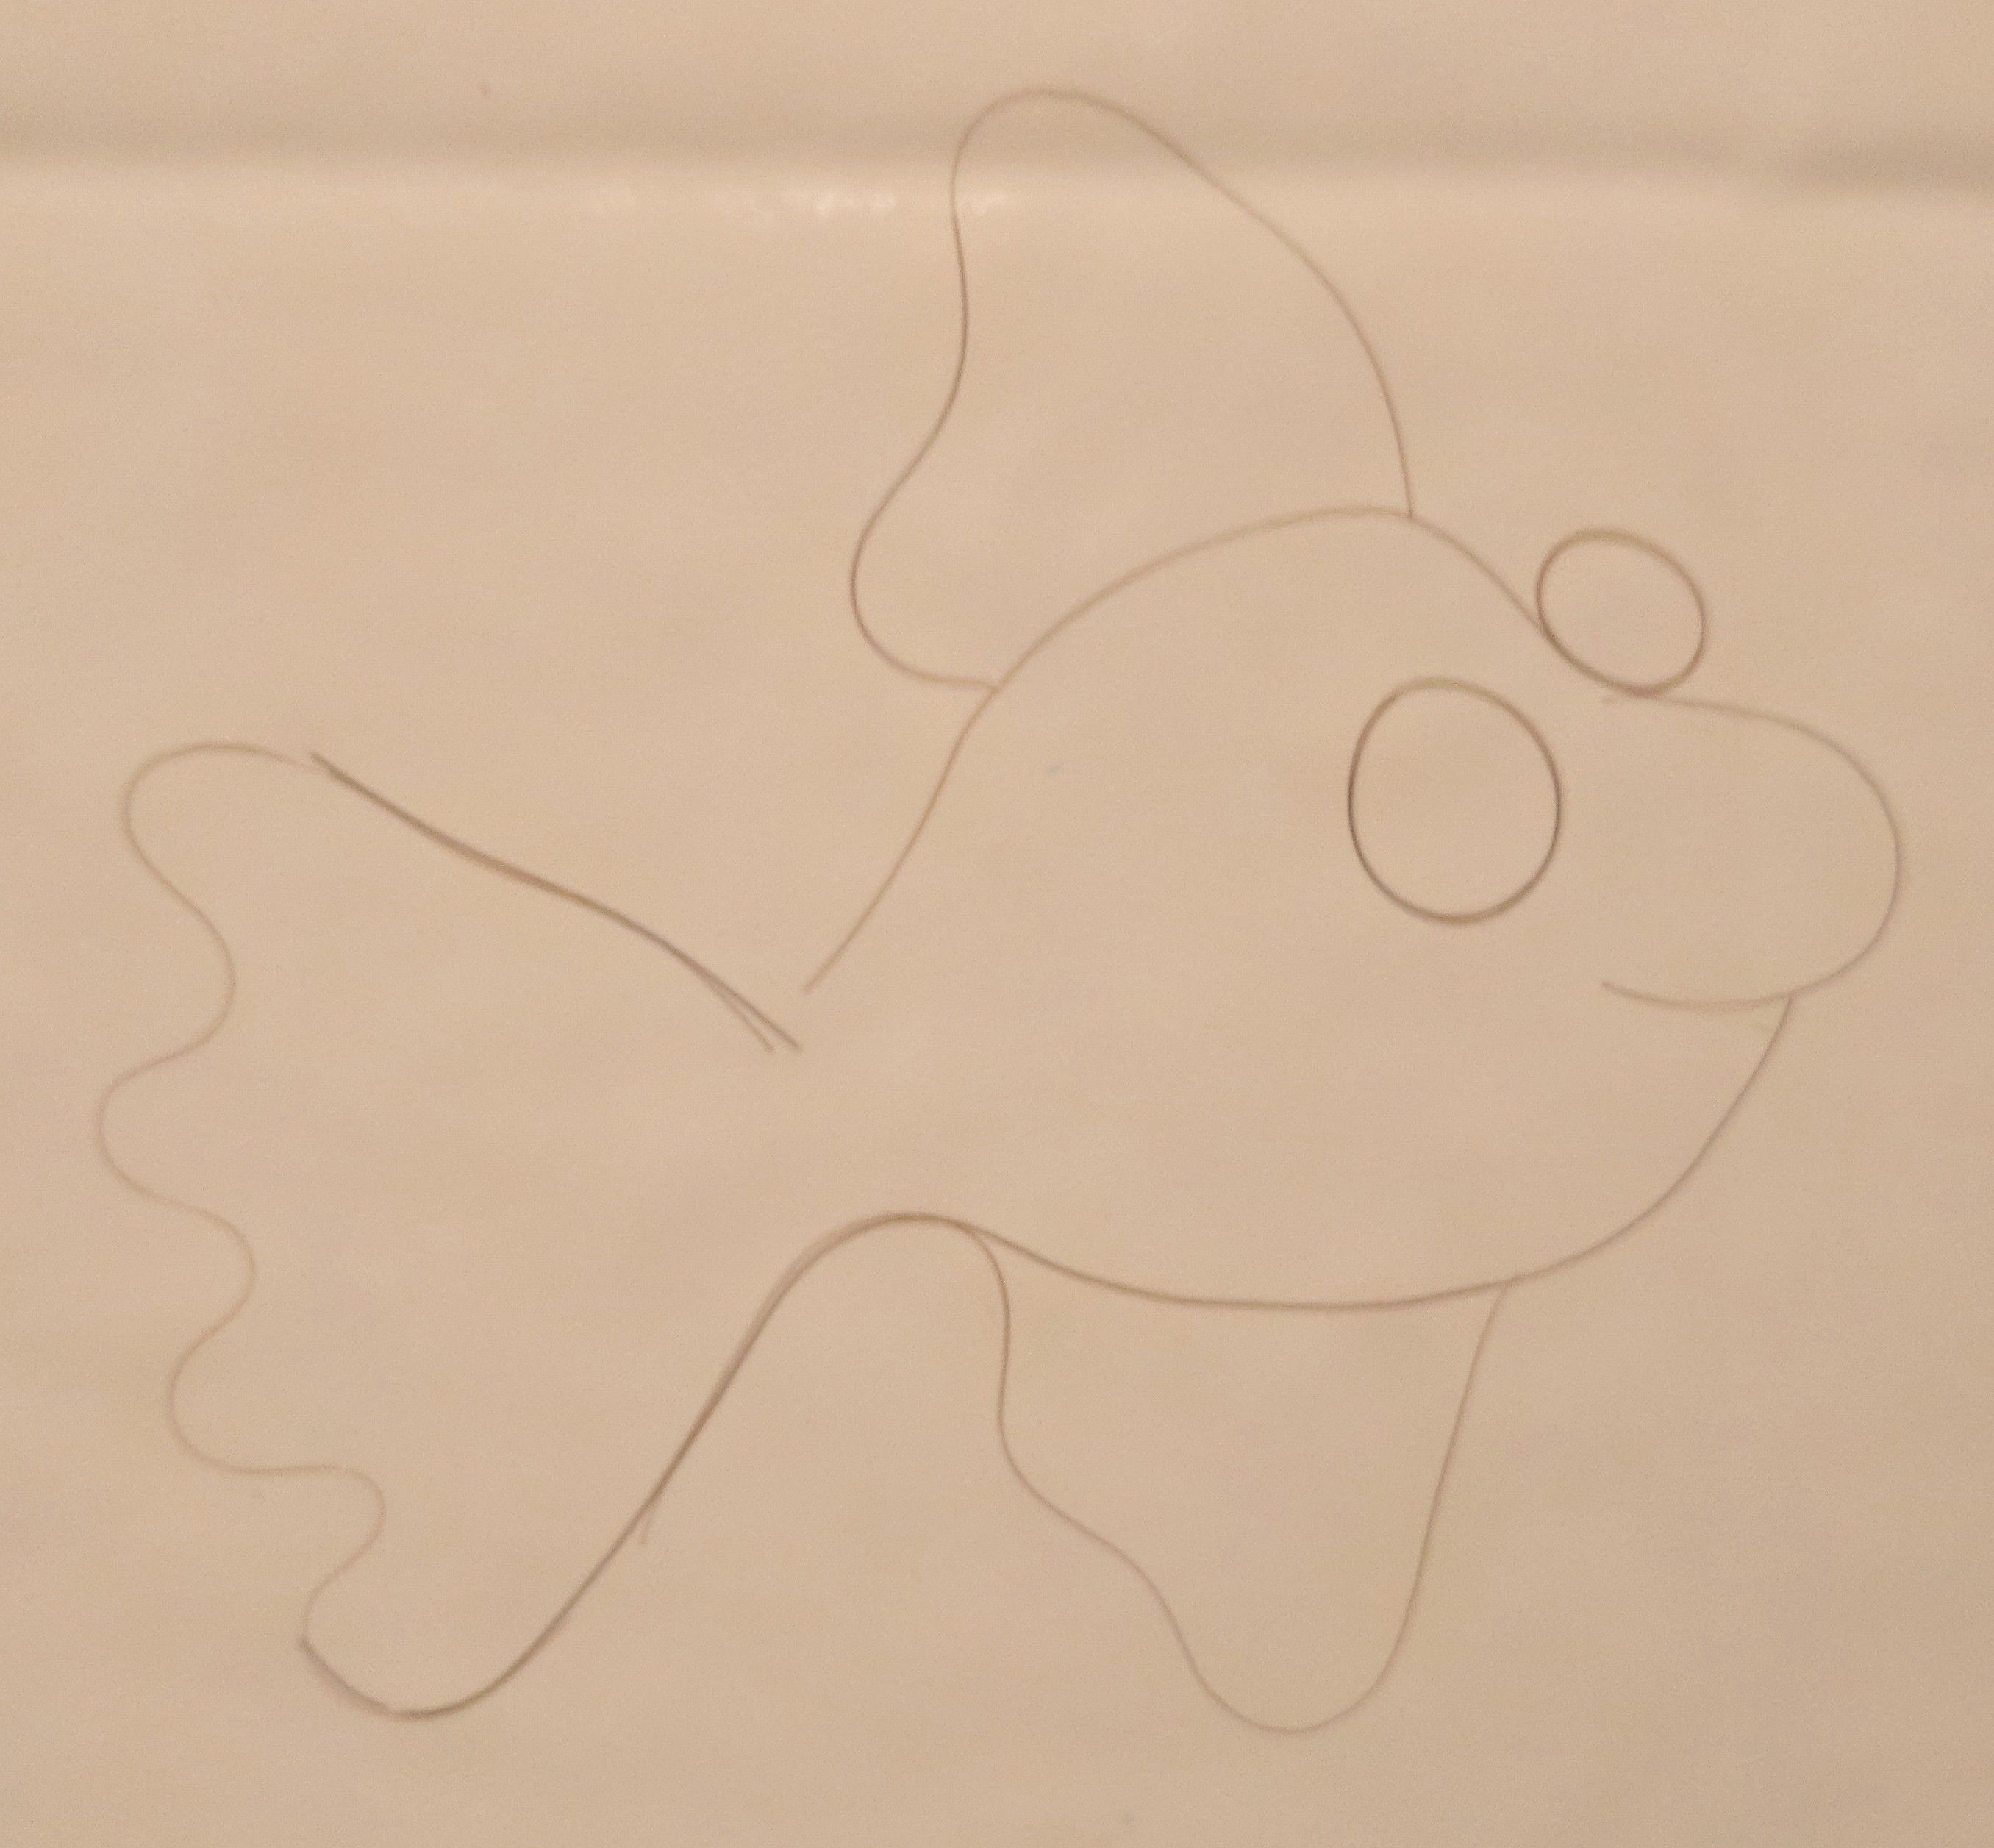 Does anyone else's wife draw with hair on the shower wall?